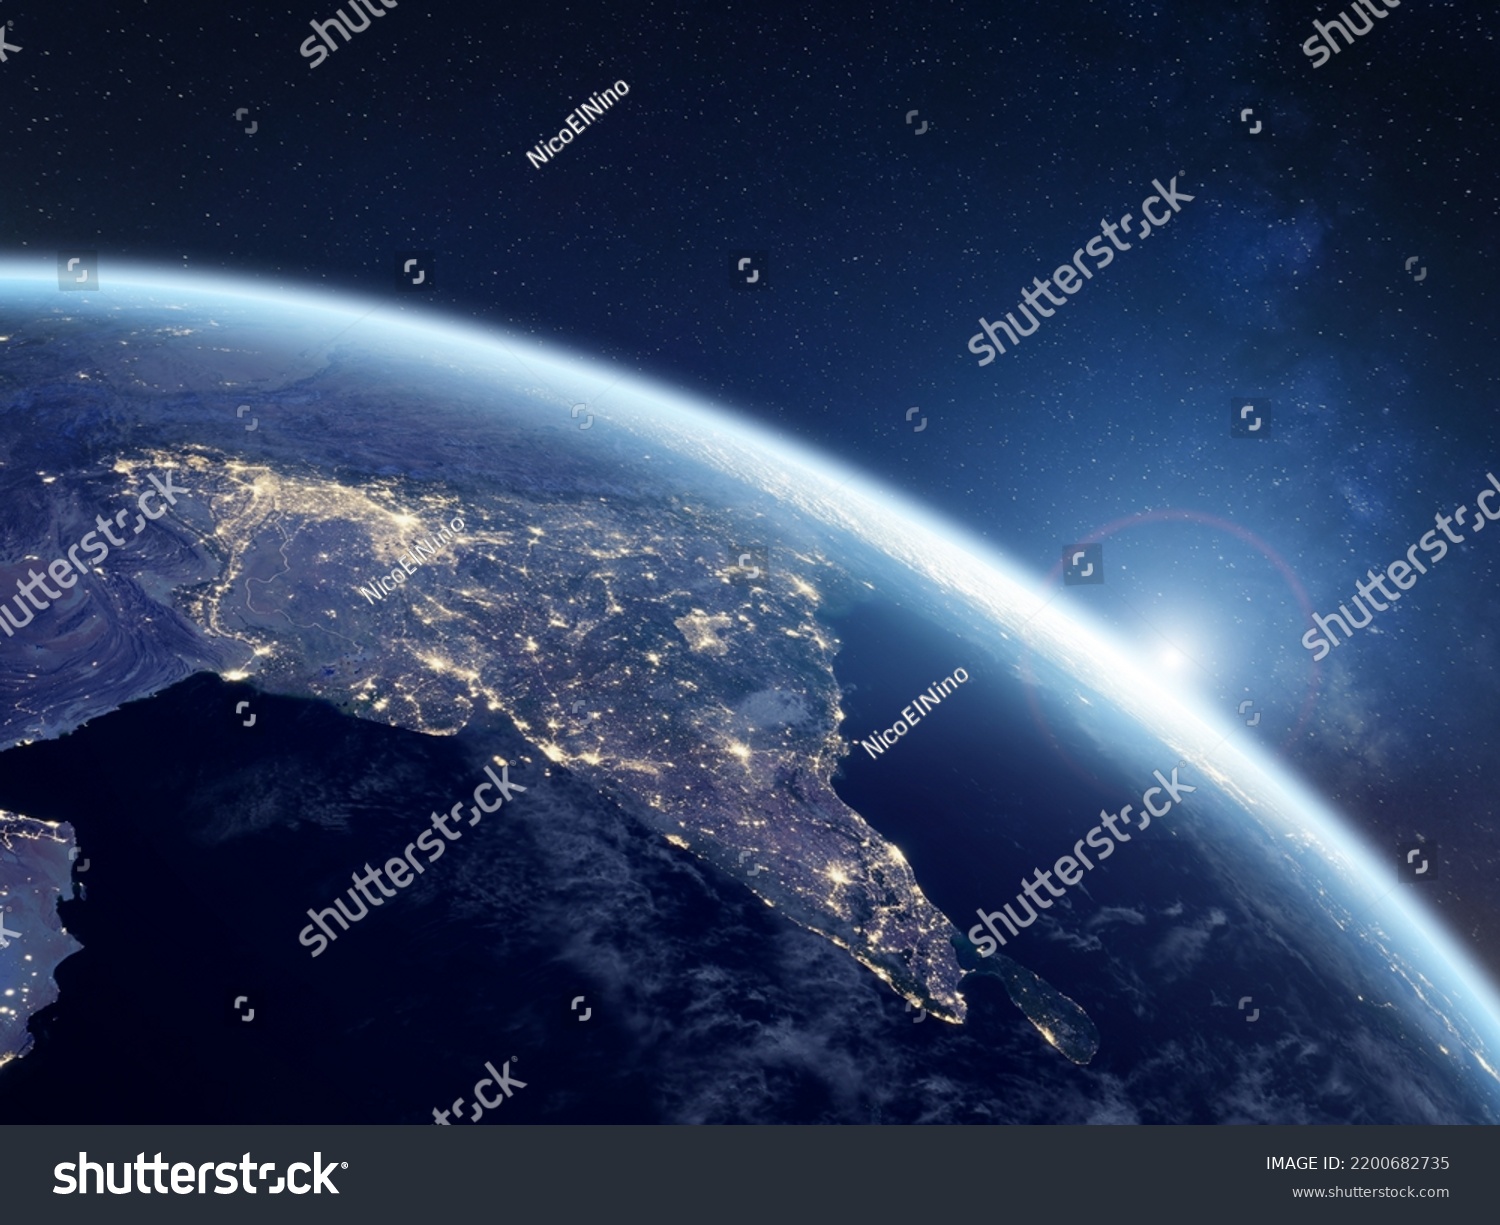 India at night viewed from space with city lights showing activity in Indian cities, Delhi, Mumbai, Bengalore. 3d render of planet Earth. Elements from NASA. Technology, global communication, world. #2200682735